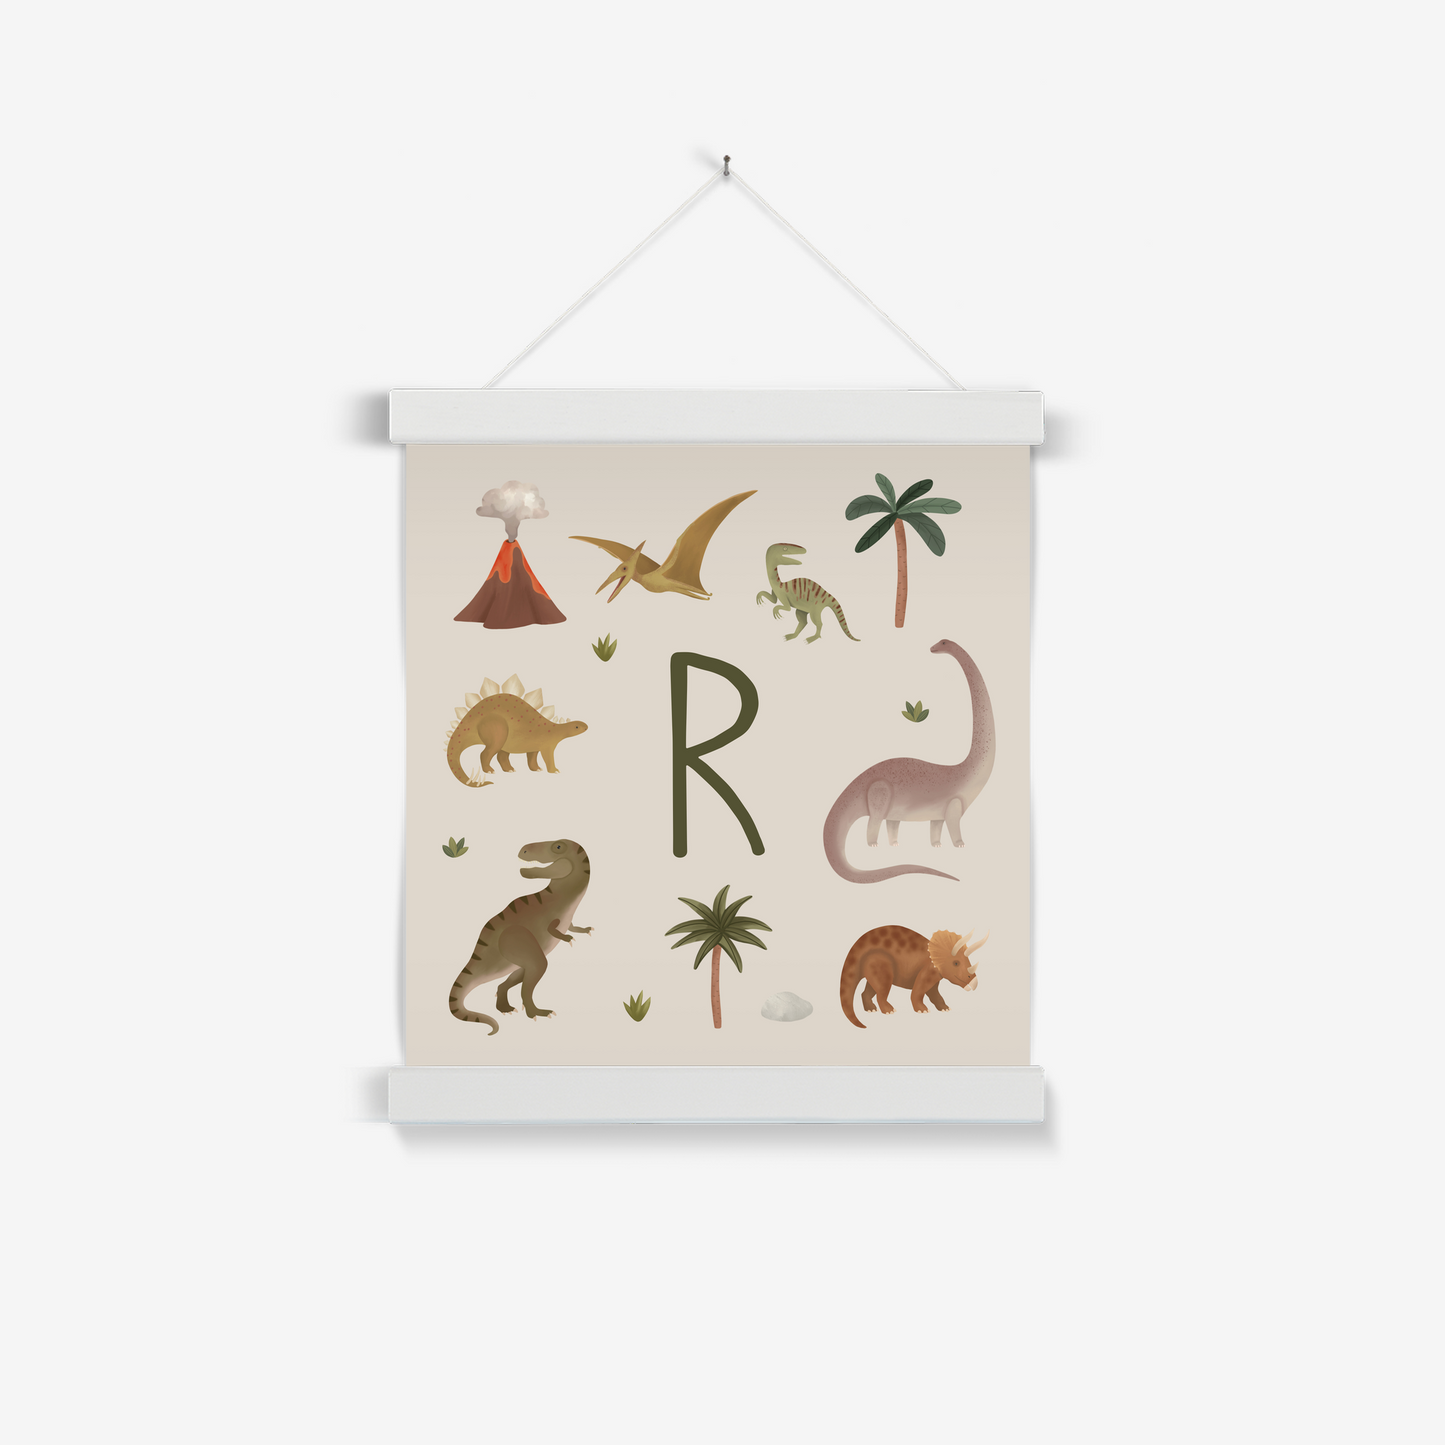 Personalised Dinosaur in stone / Print with Hanger